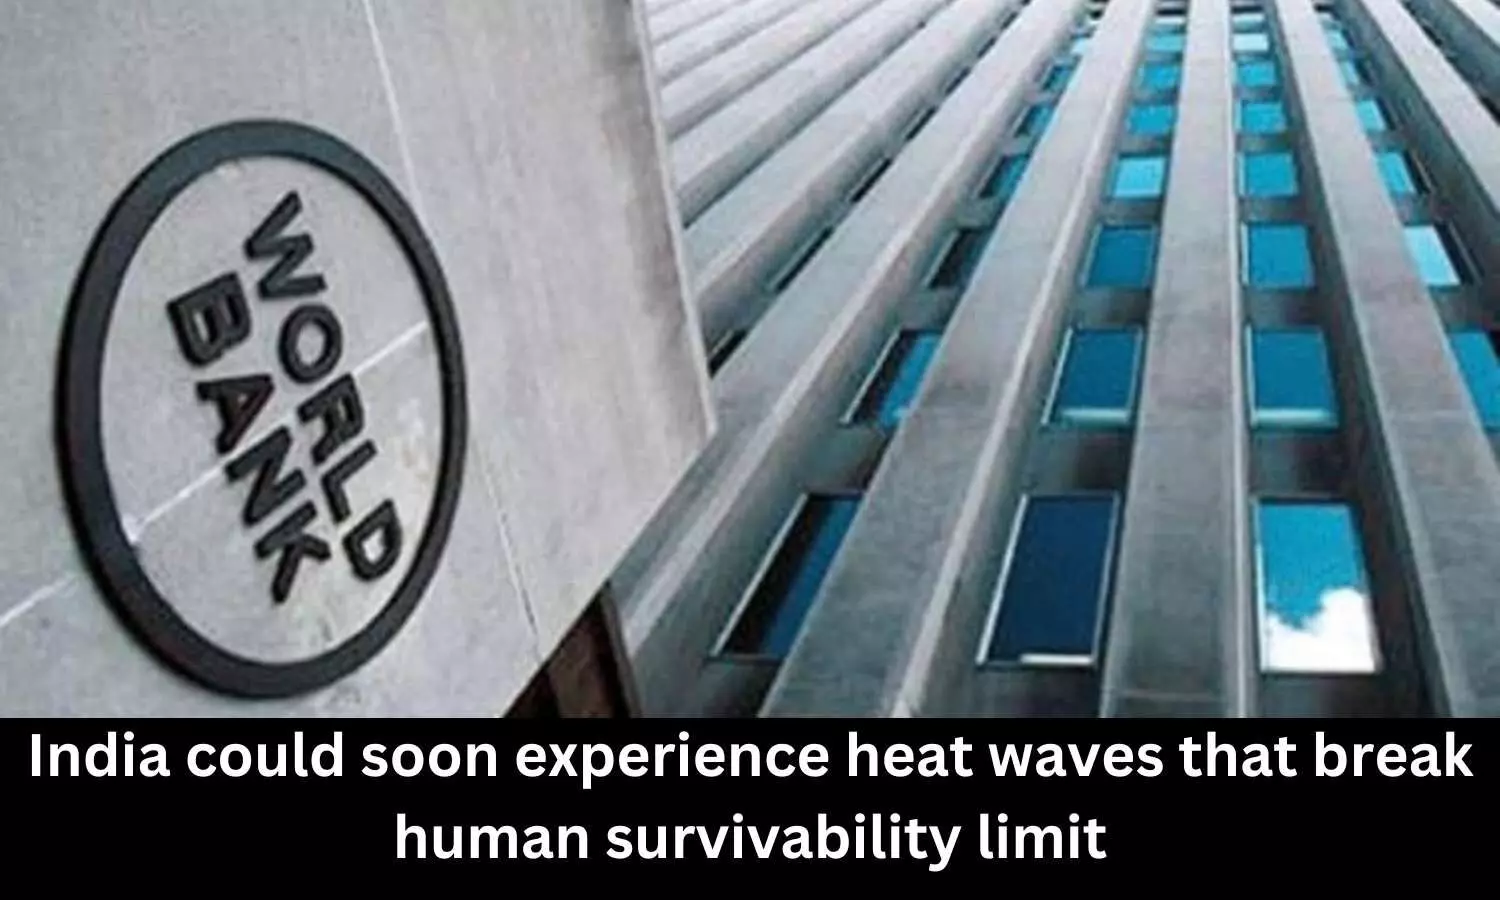 India could soon experience heat waves that break human survivability limit: World Bank report